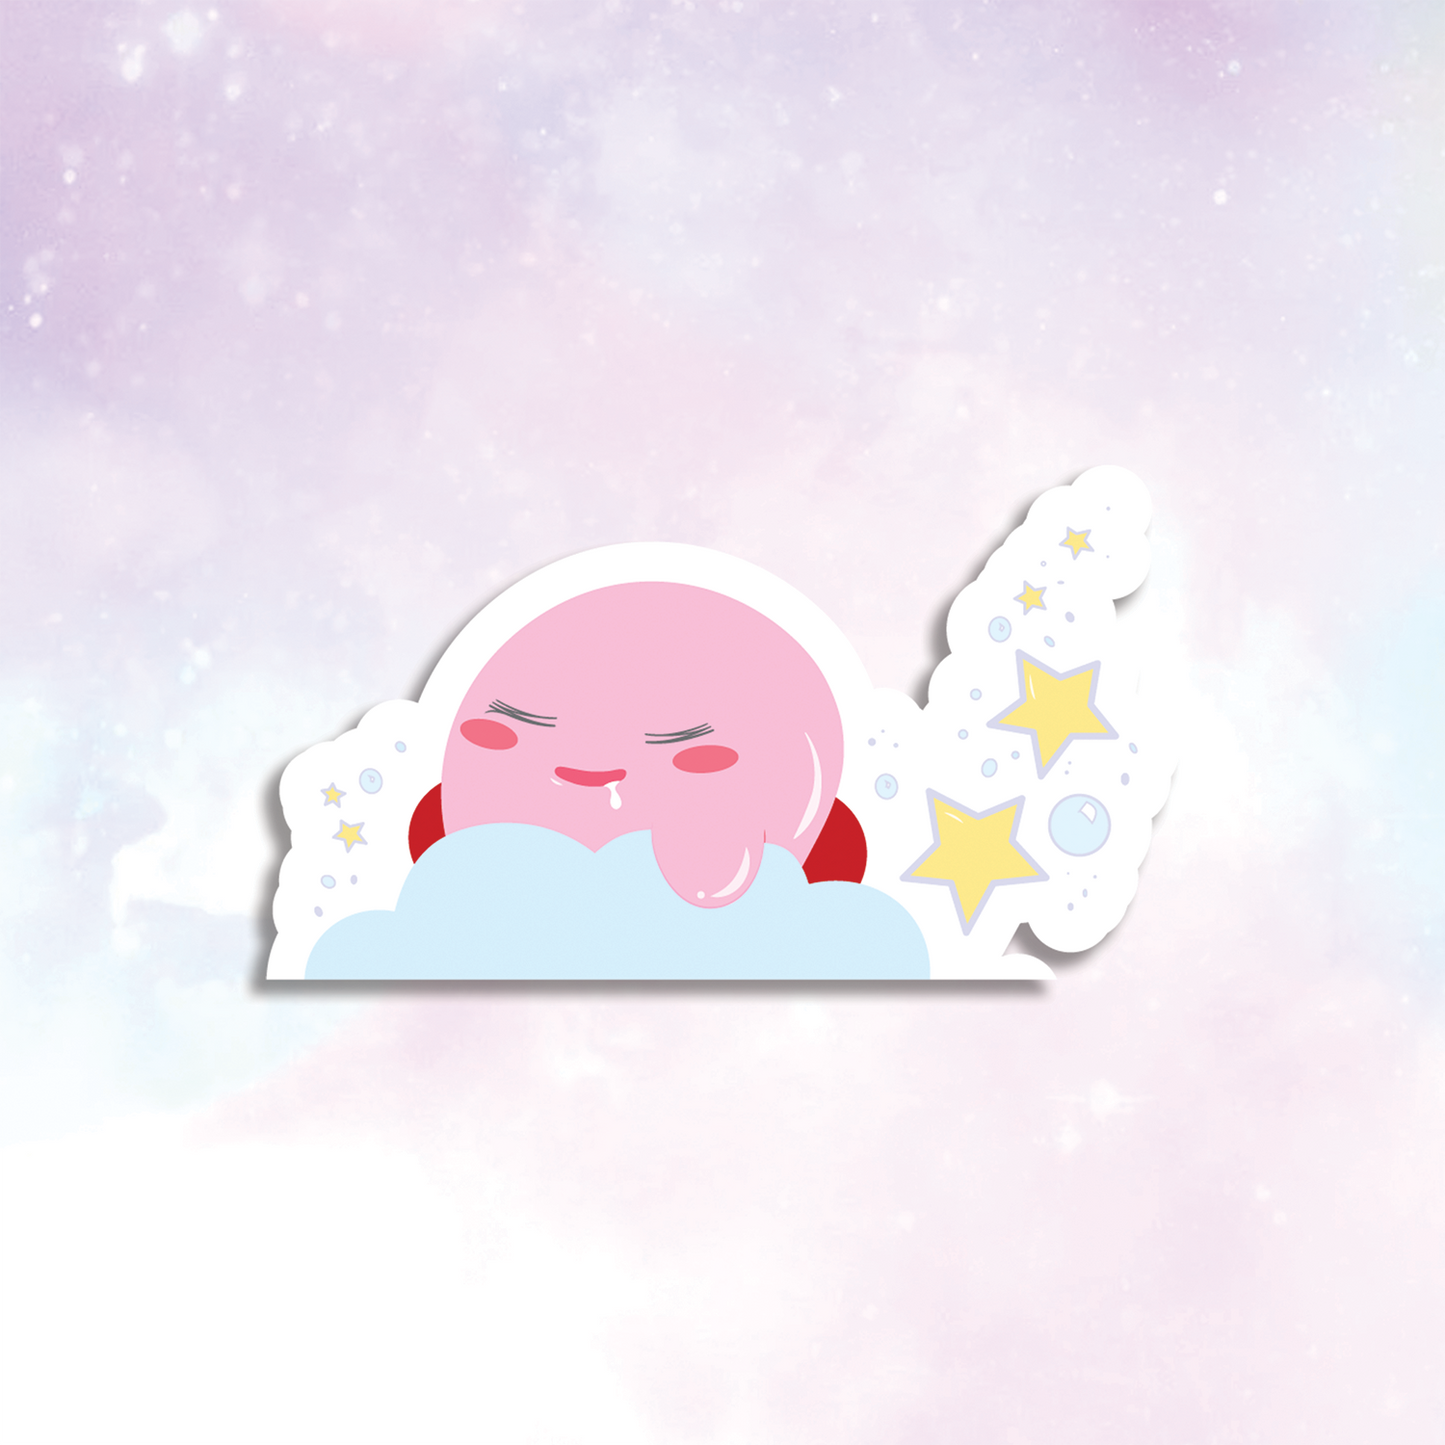 Sleeping Kirby Sticker design features Kirby sleeping on a cloud ornamented with stars and bubbles, meanwhile drooling while he snores in a peeking-over style.